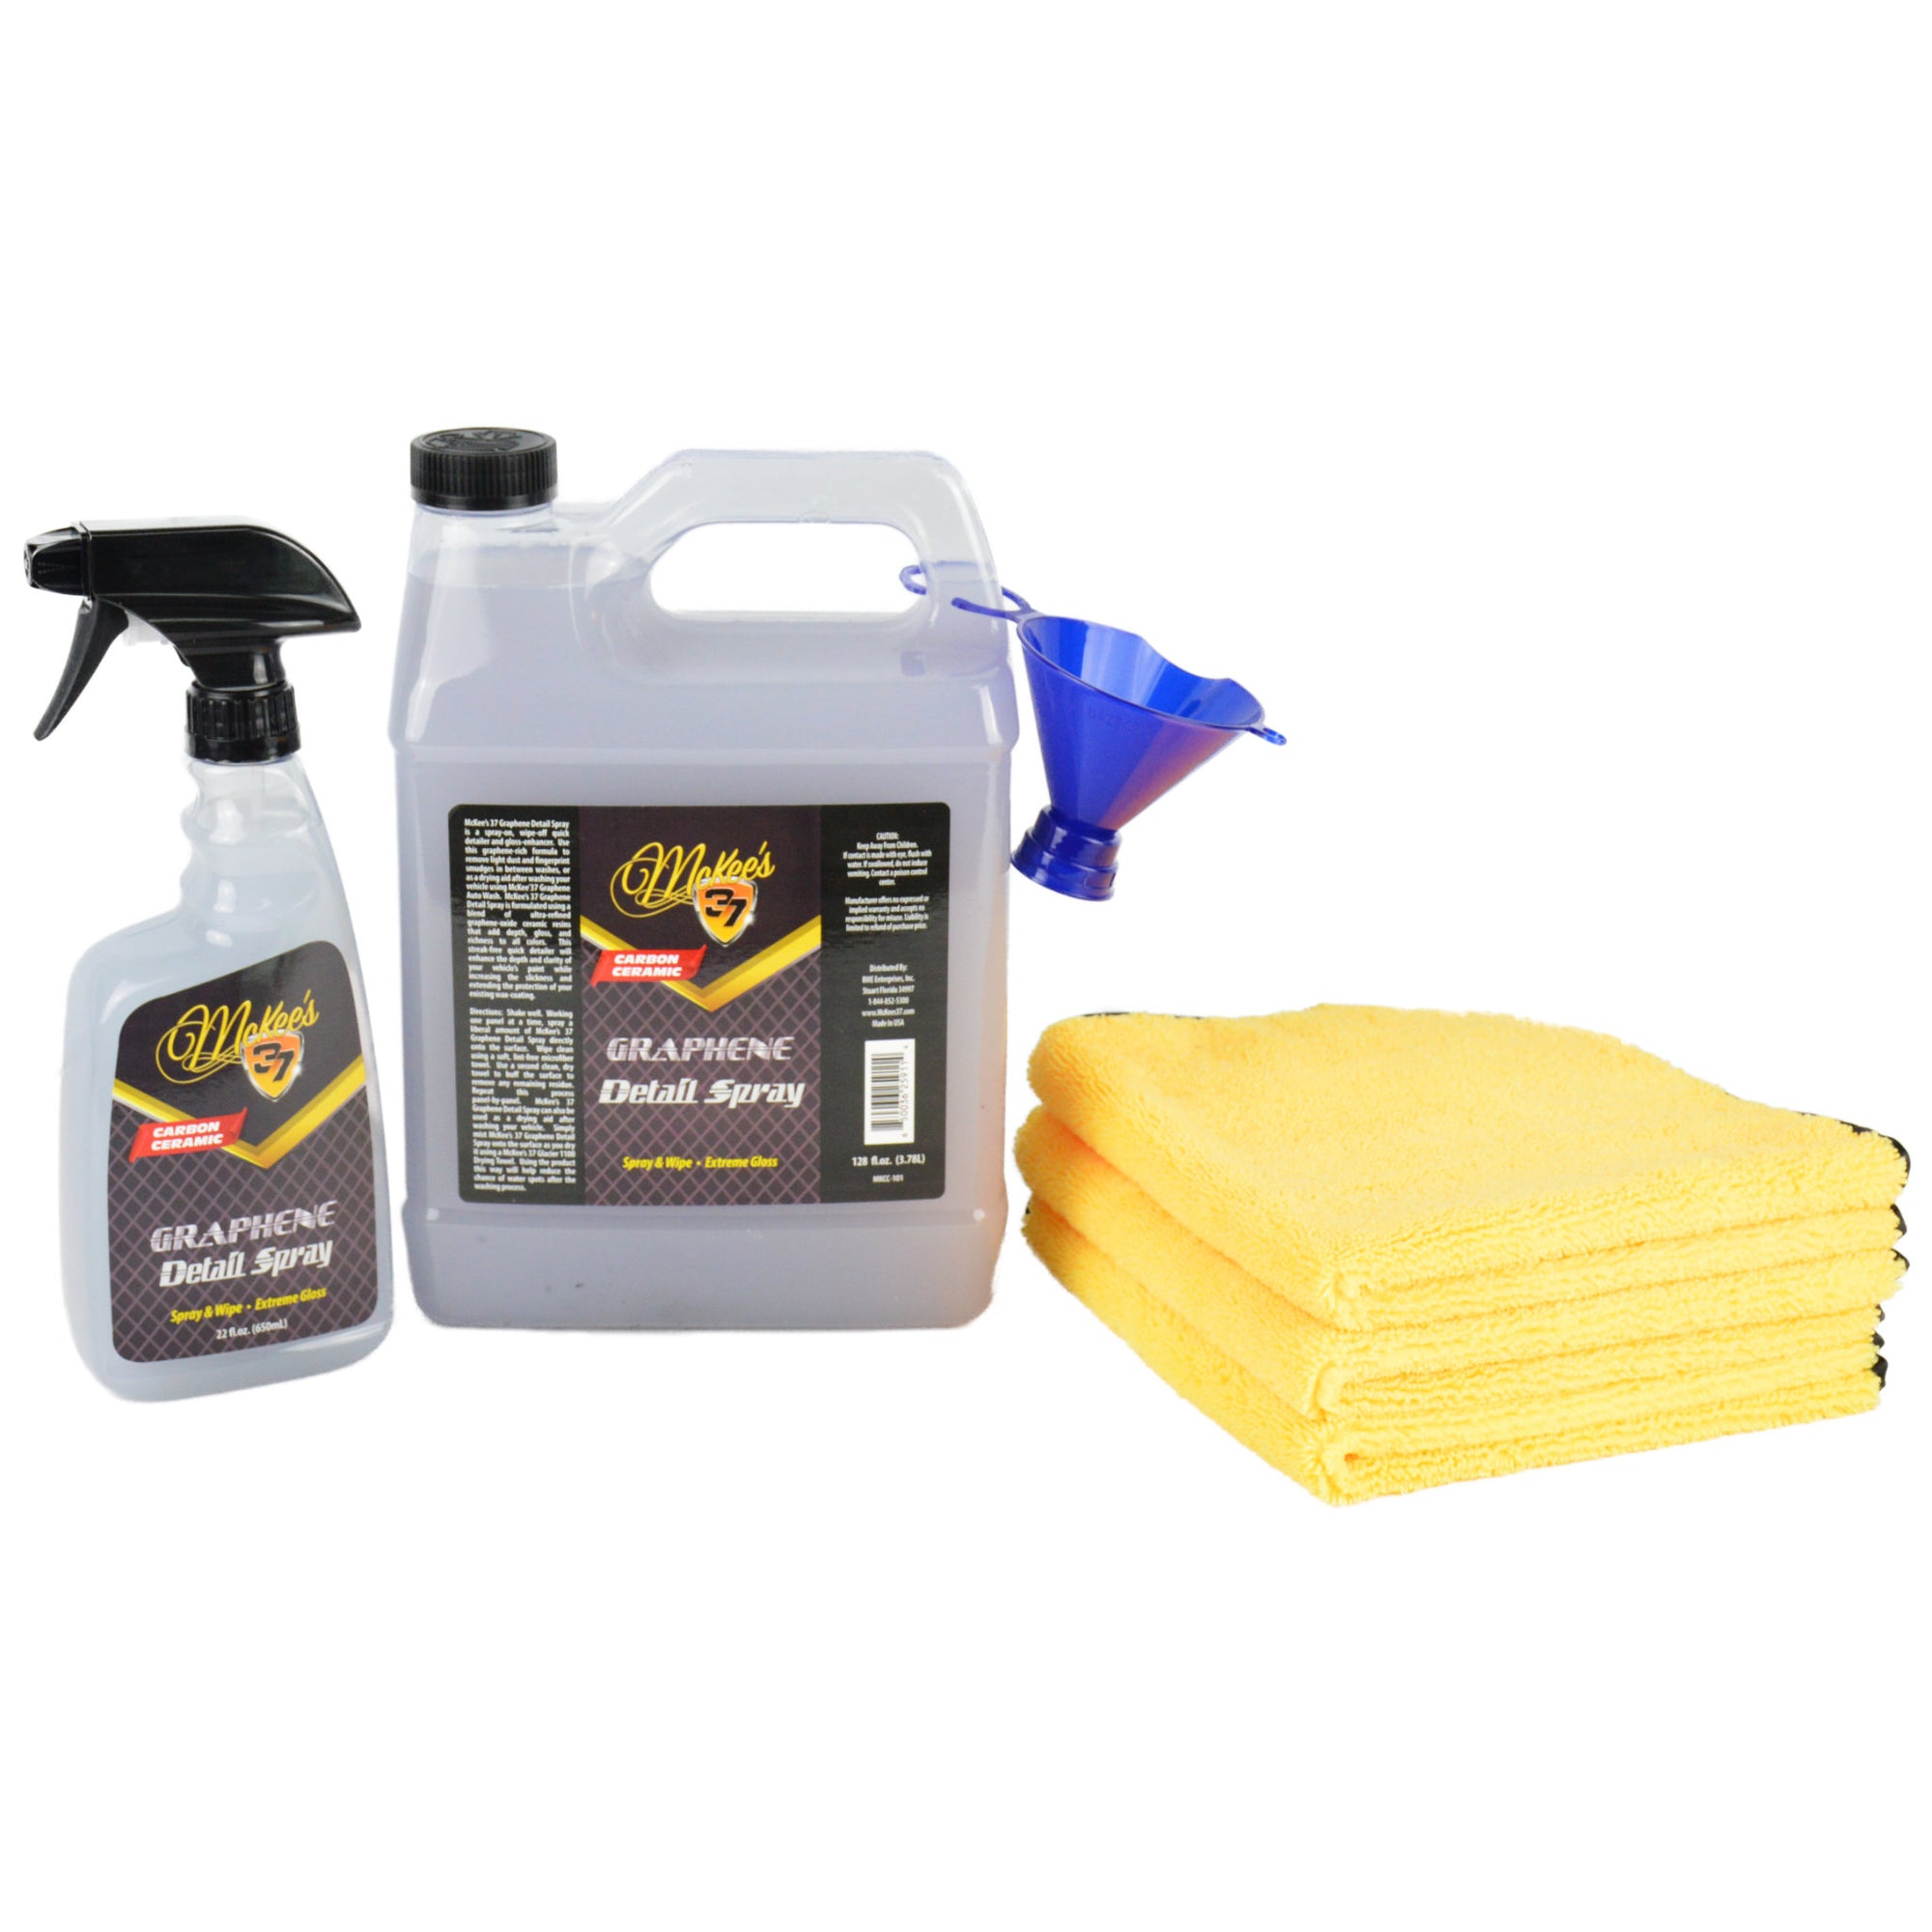 300ml Car Coating Spray Car Wax Polish Spray Water-repellent Car Coating  Spray Vehicles Cleaning Supplies For Cars Truck Motor